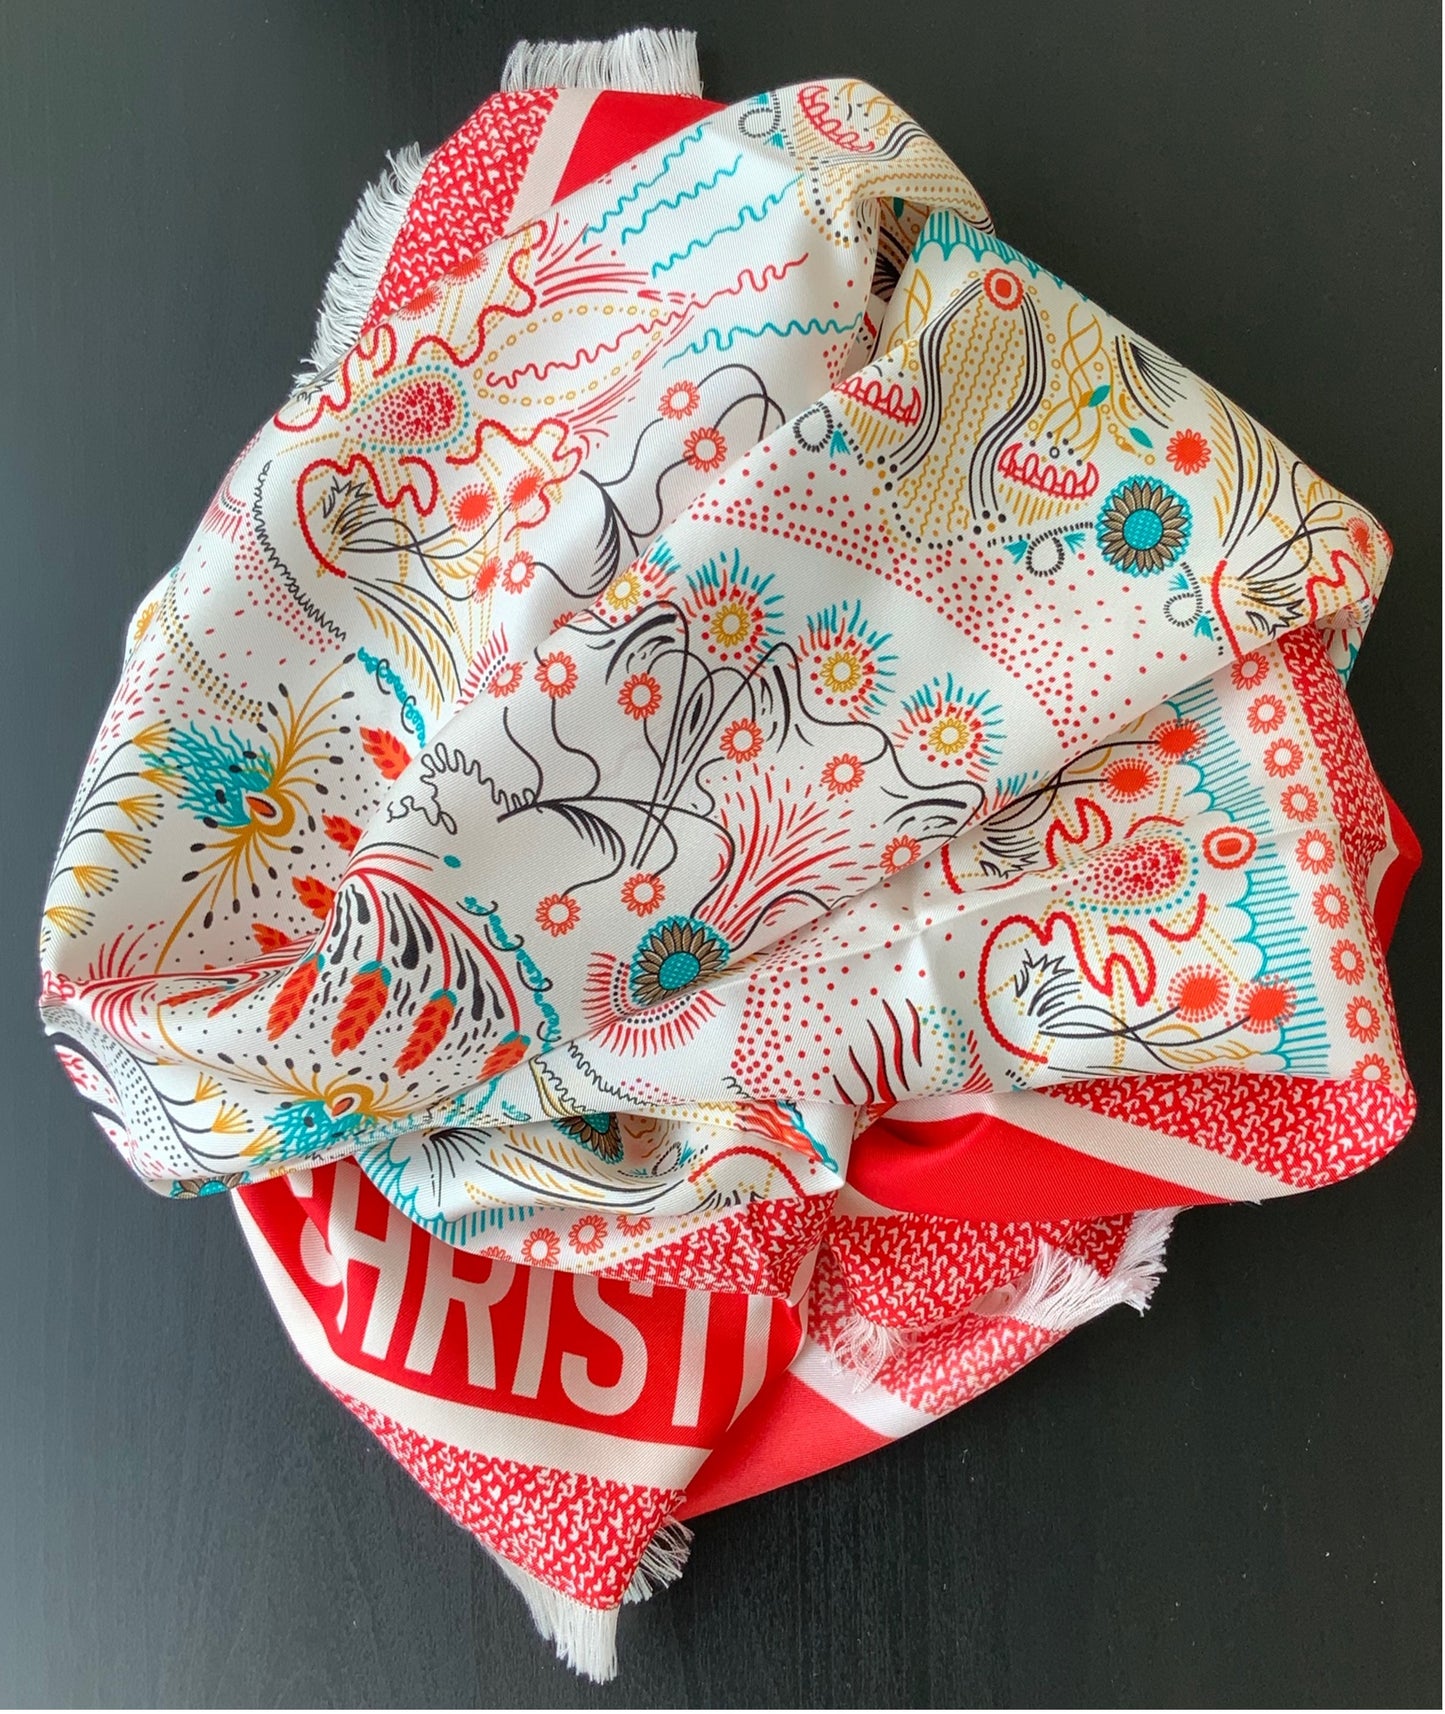 Woman Pre-Loved  Pre-Owned Scarf Silk Vintage Christian Dior "Abstract Leaf Design" Red Cream Carré de soie Pastel Colors